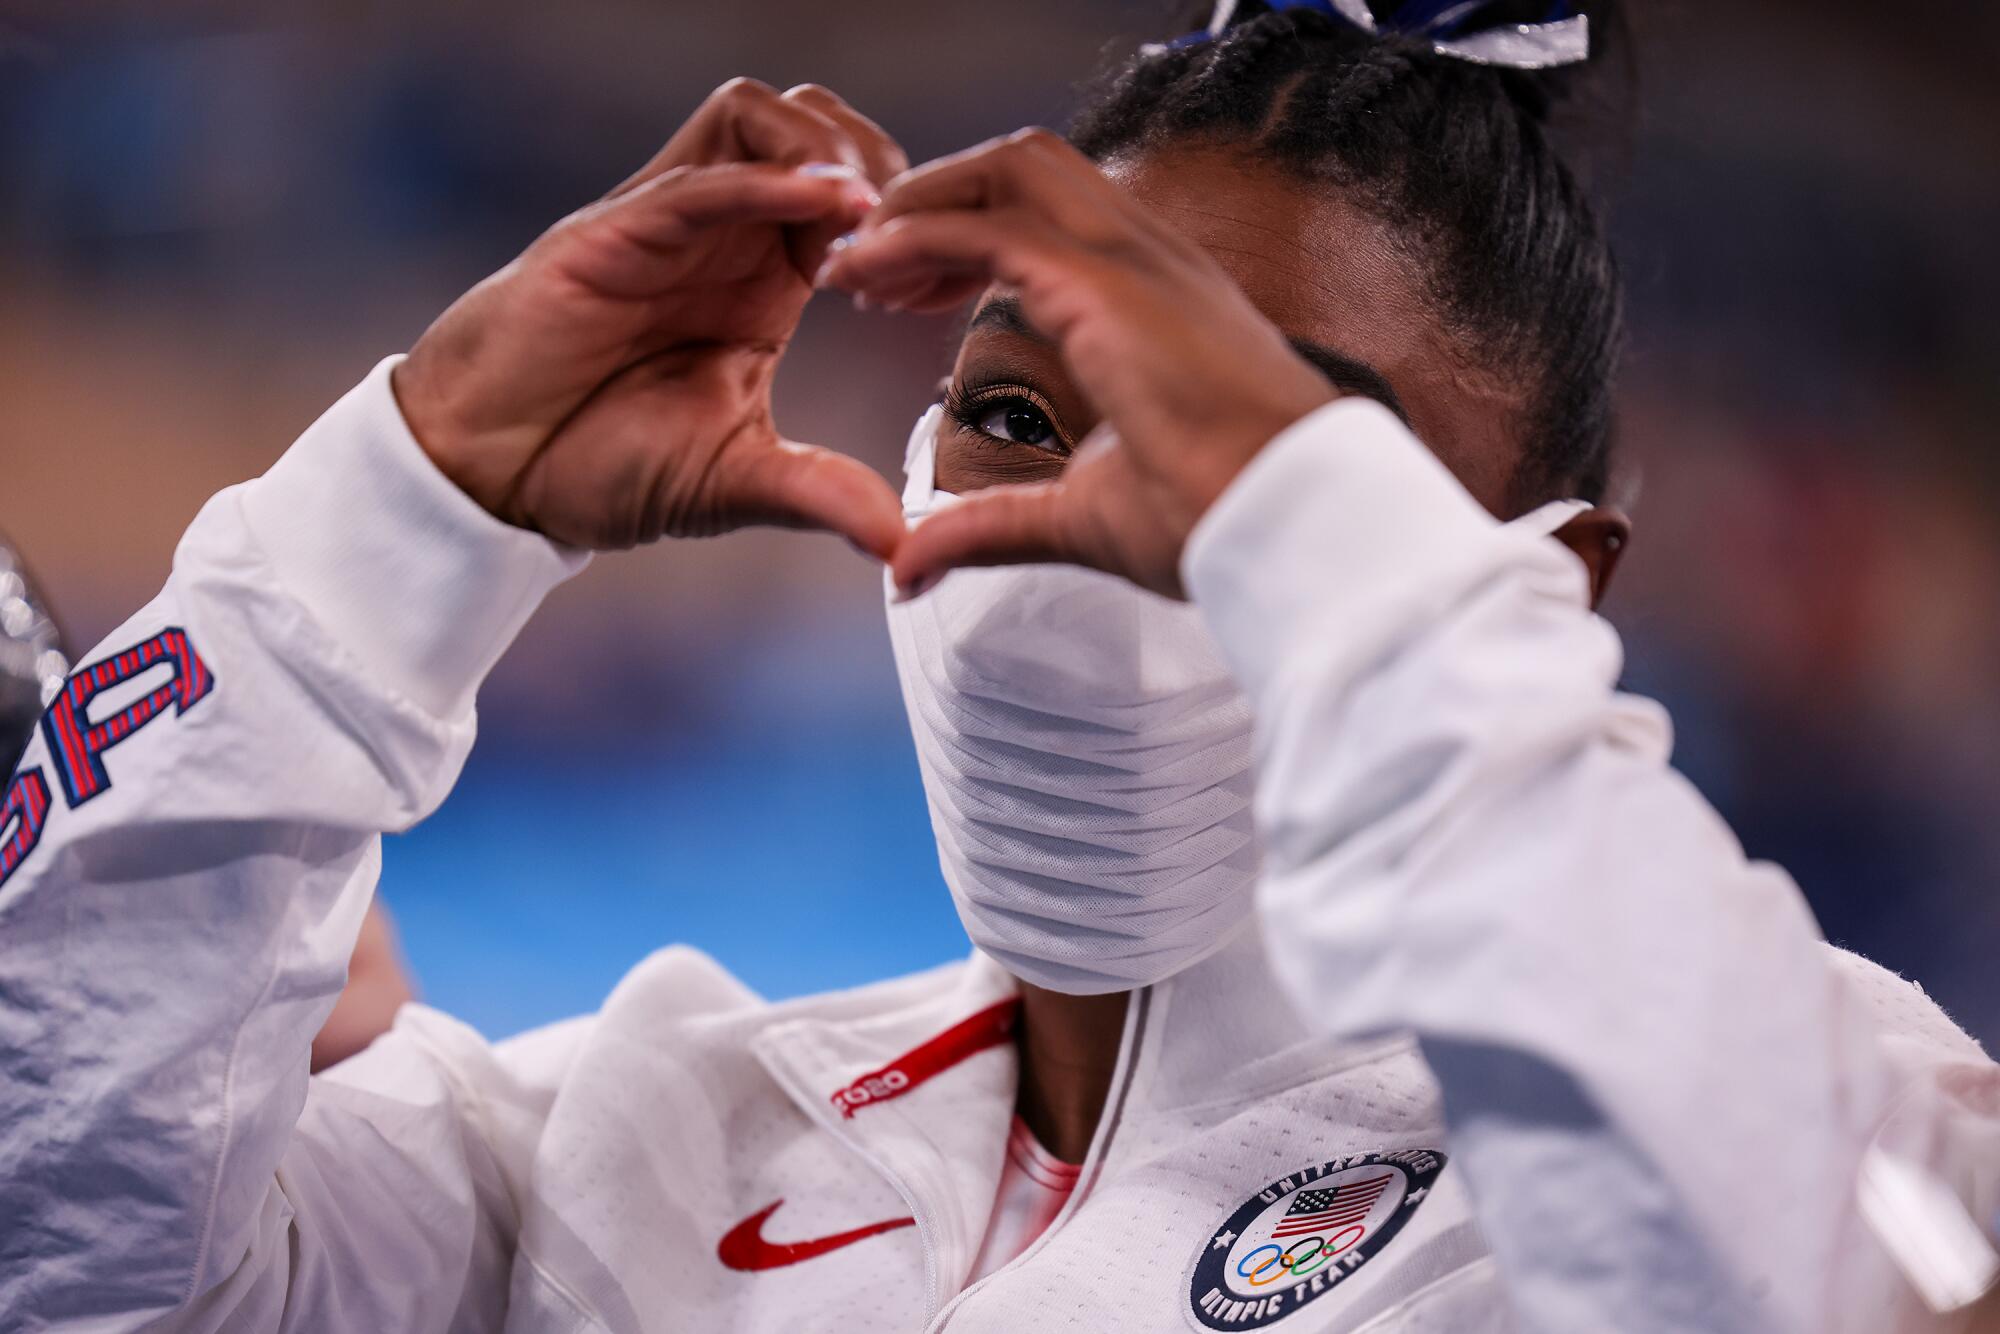 Simone Biles flashes the heart sign to a fan